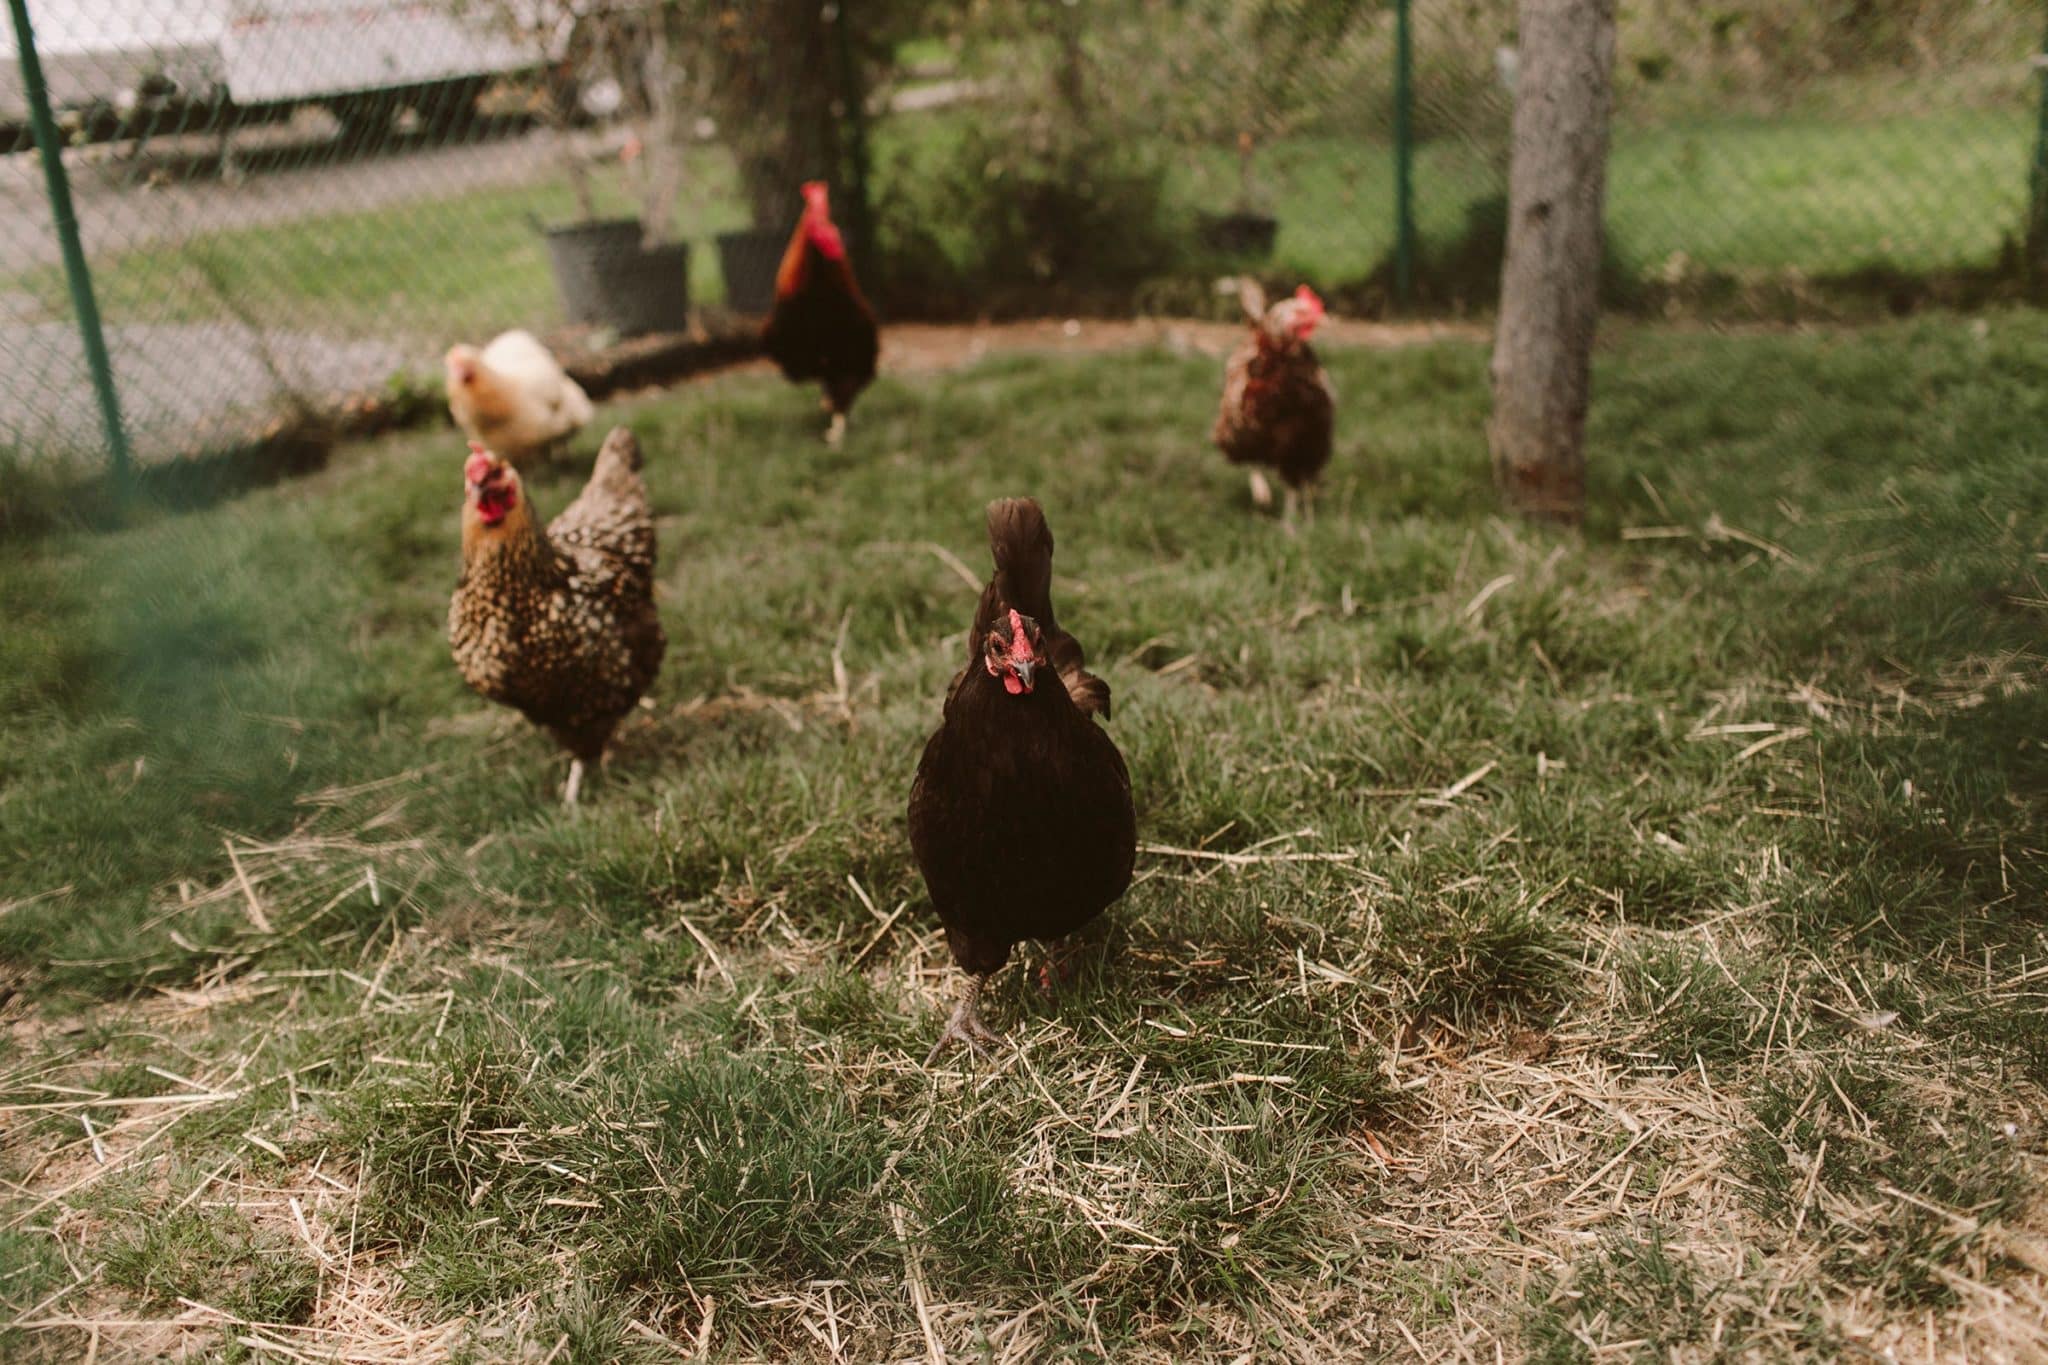 assorted chickens on grass